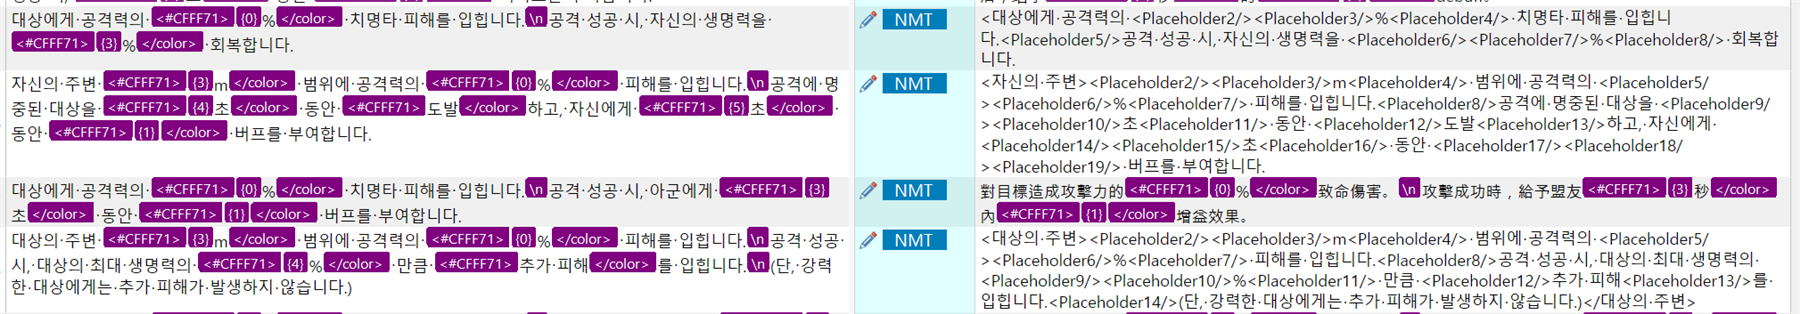 Screenshot of translation segments with excessive placeholders highlighted in purple and orange, indicating incorrect placeholder usage.